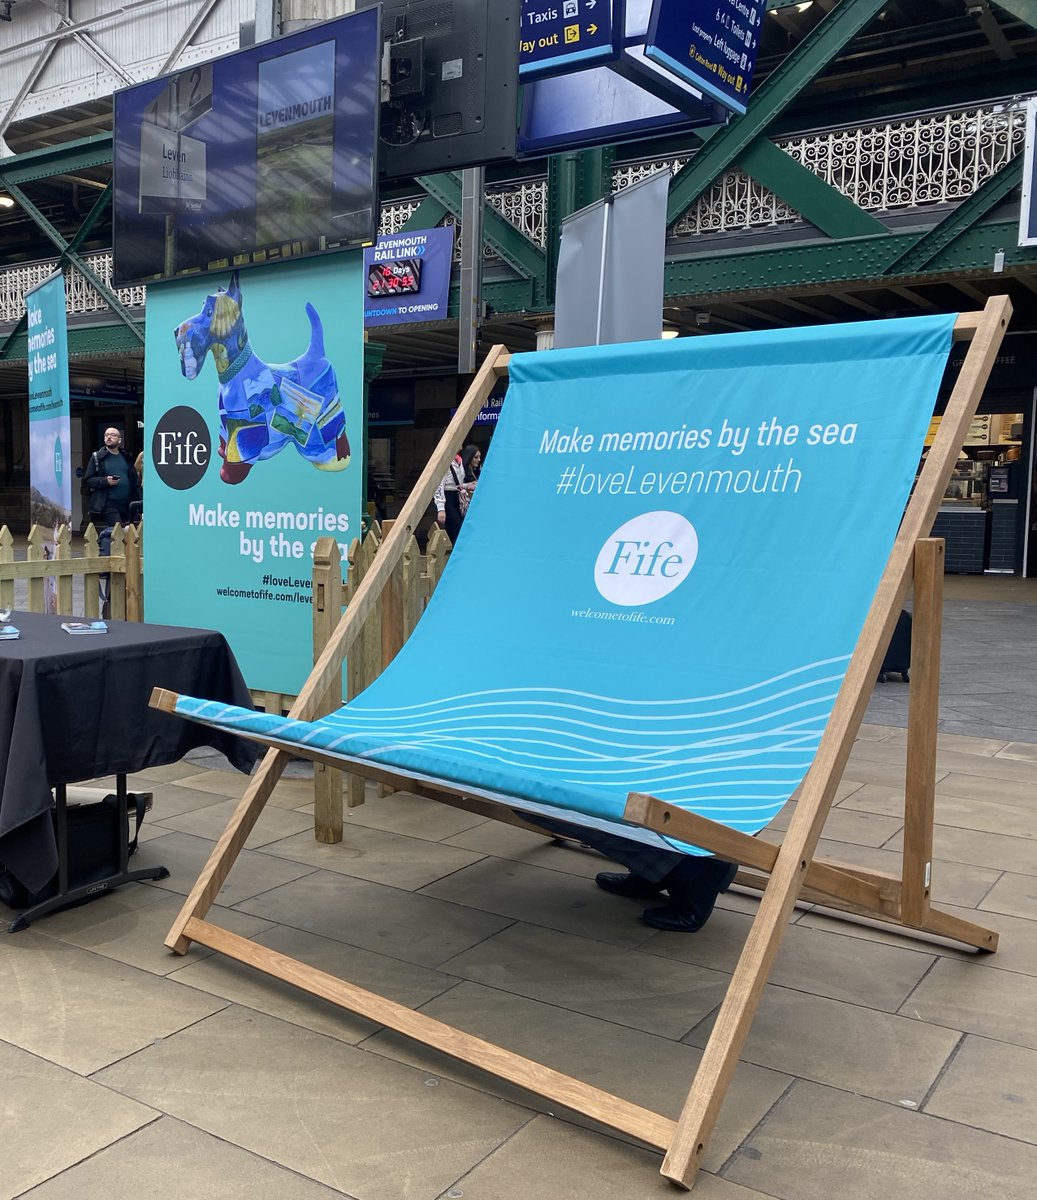 If you're passing through Waverley Station in #Edinburgh stop by our Levenmouth Expo - don't forget a selfie in our giant deck chair! We'll be there Thursdays, Fridays & Saturdays for the next few weeks #LoveFife #LoveLevenmouth #KingdomOfFife @ScotRail